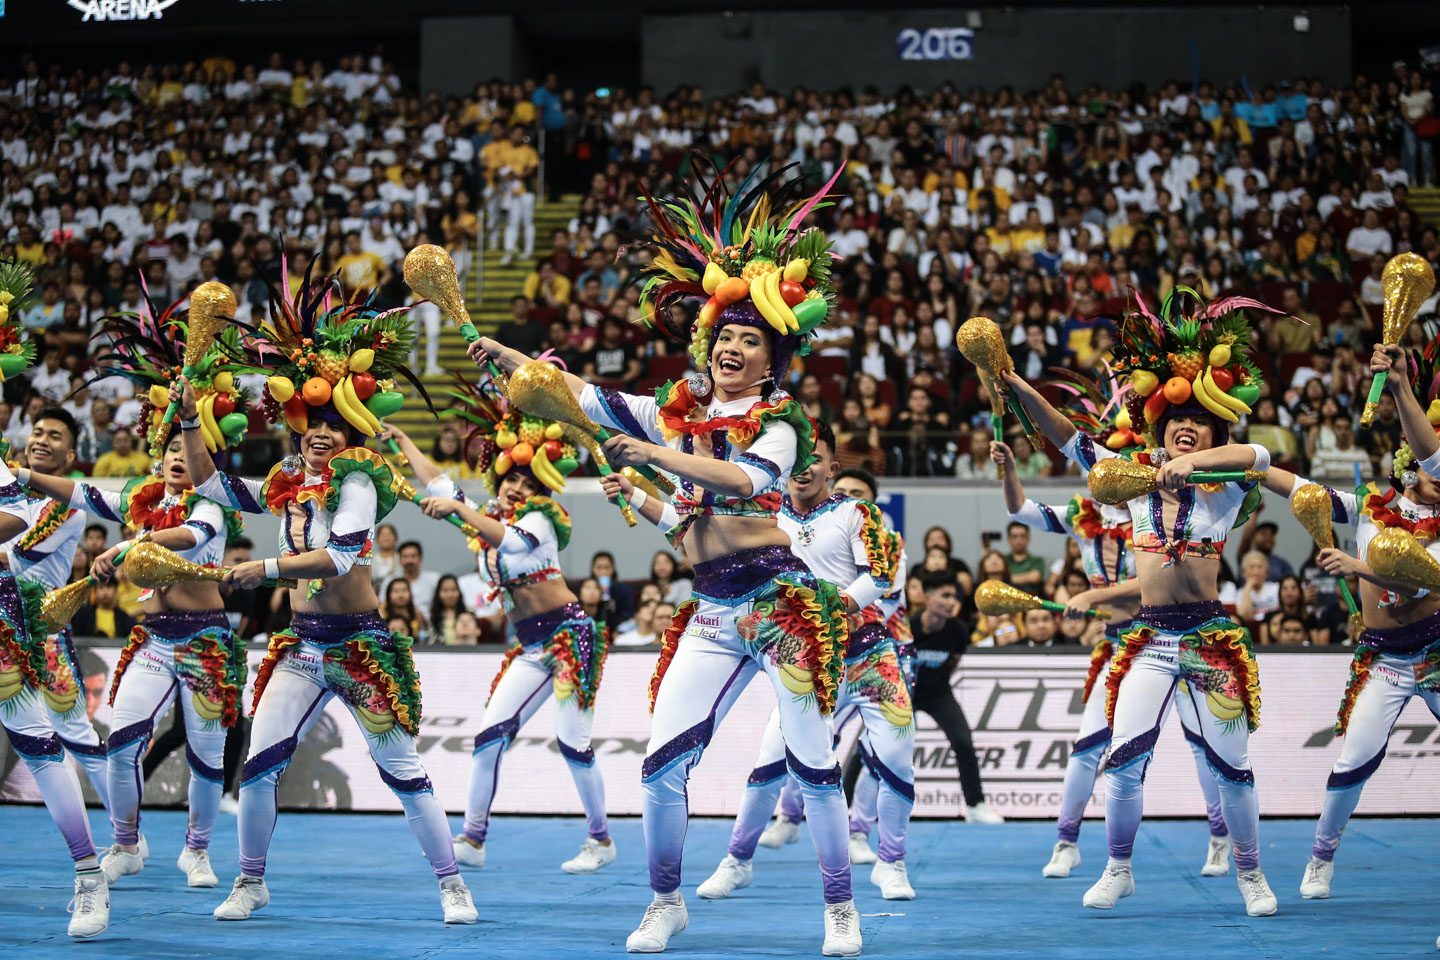 FESTIVE. Adamson continues to bring joy in their performances with big smiles and festive colors. Photo by Josh Albelda/Rappler 